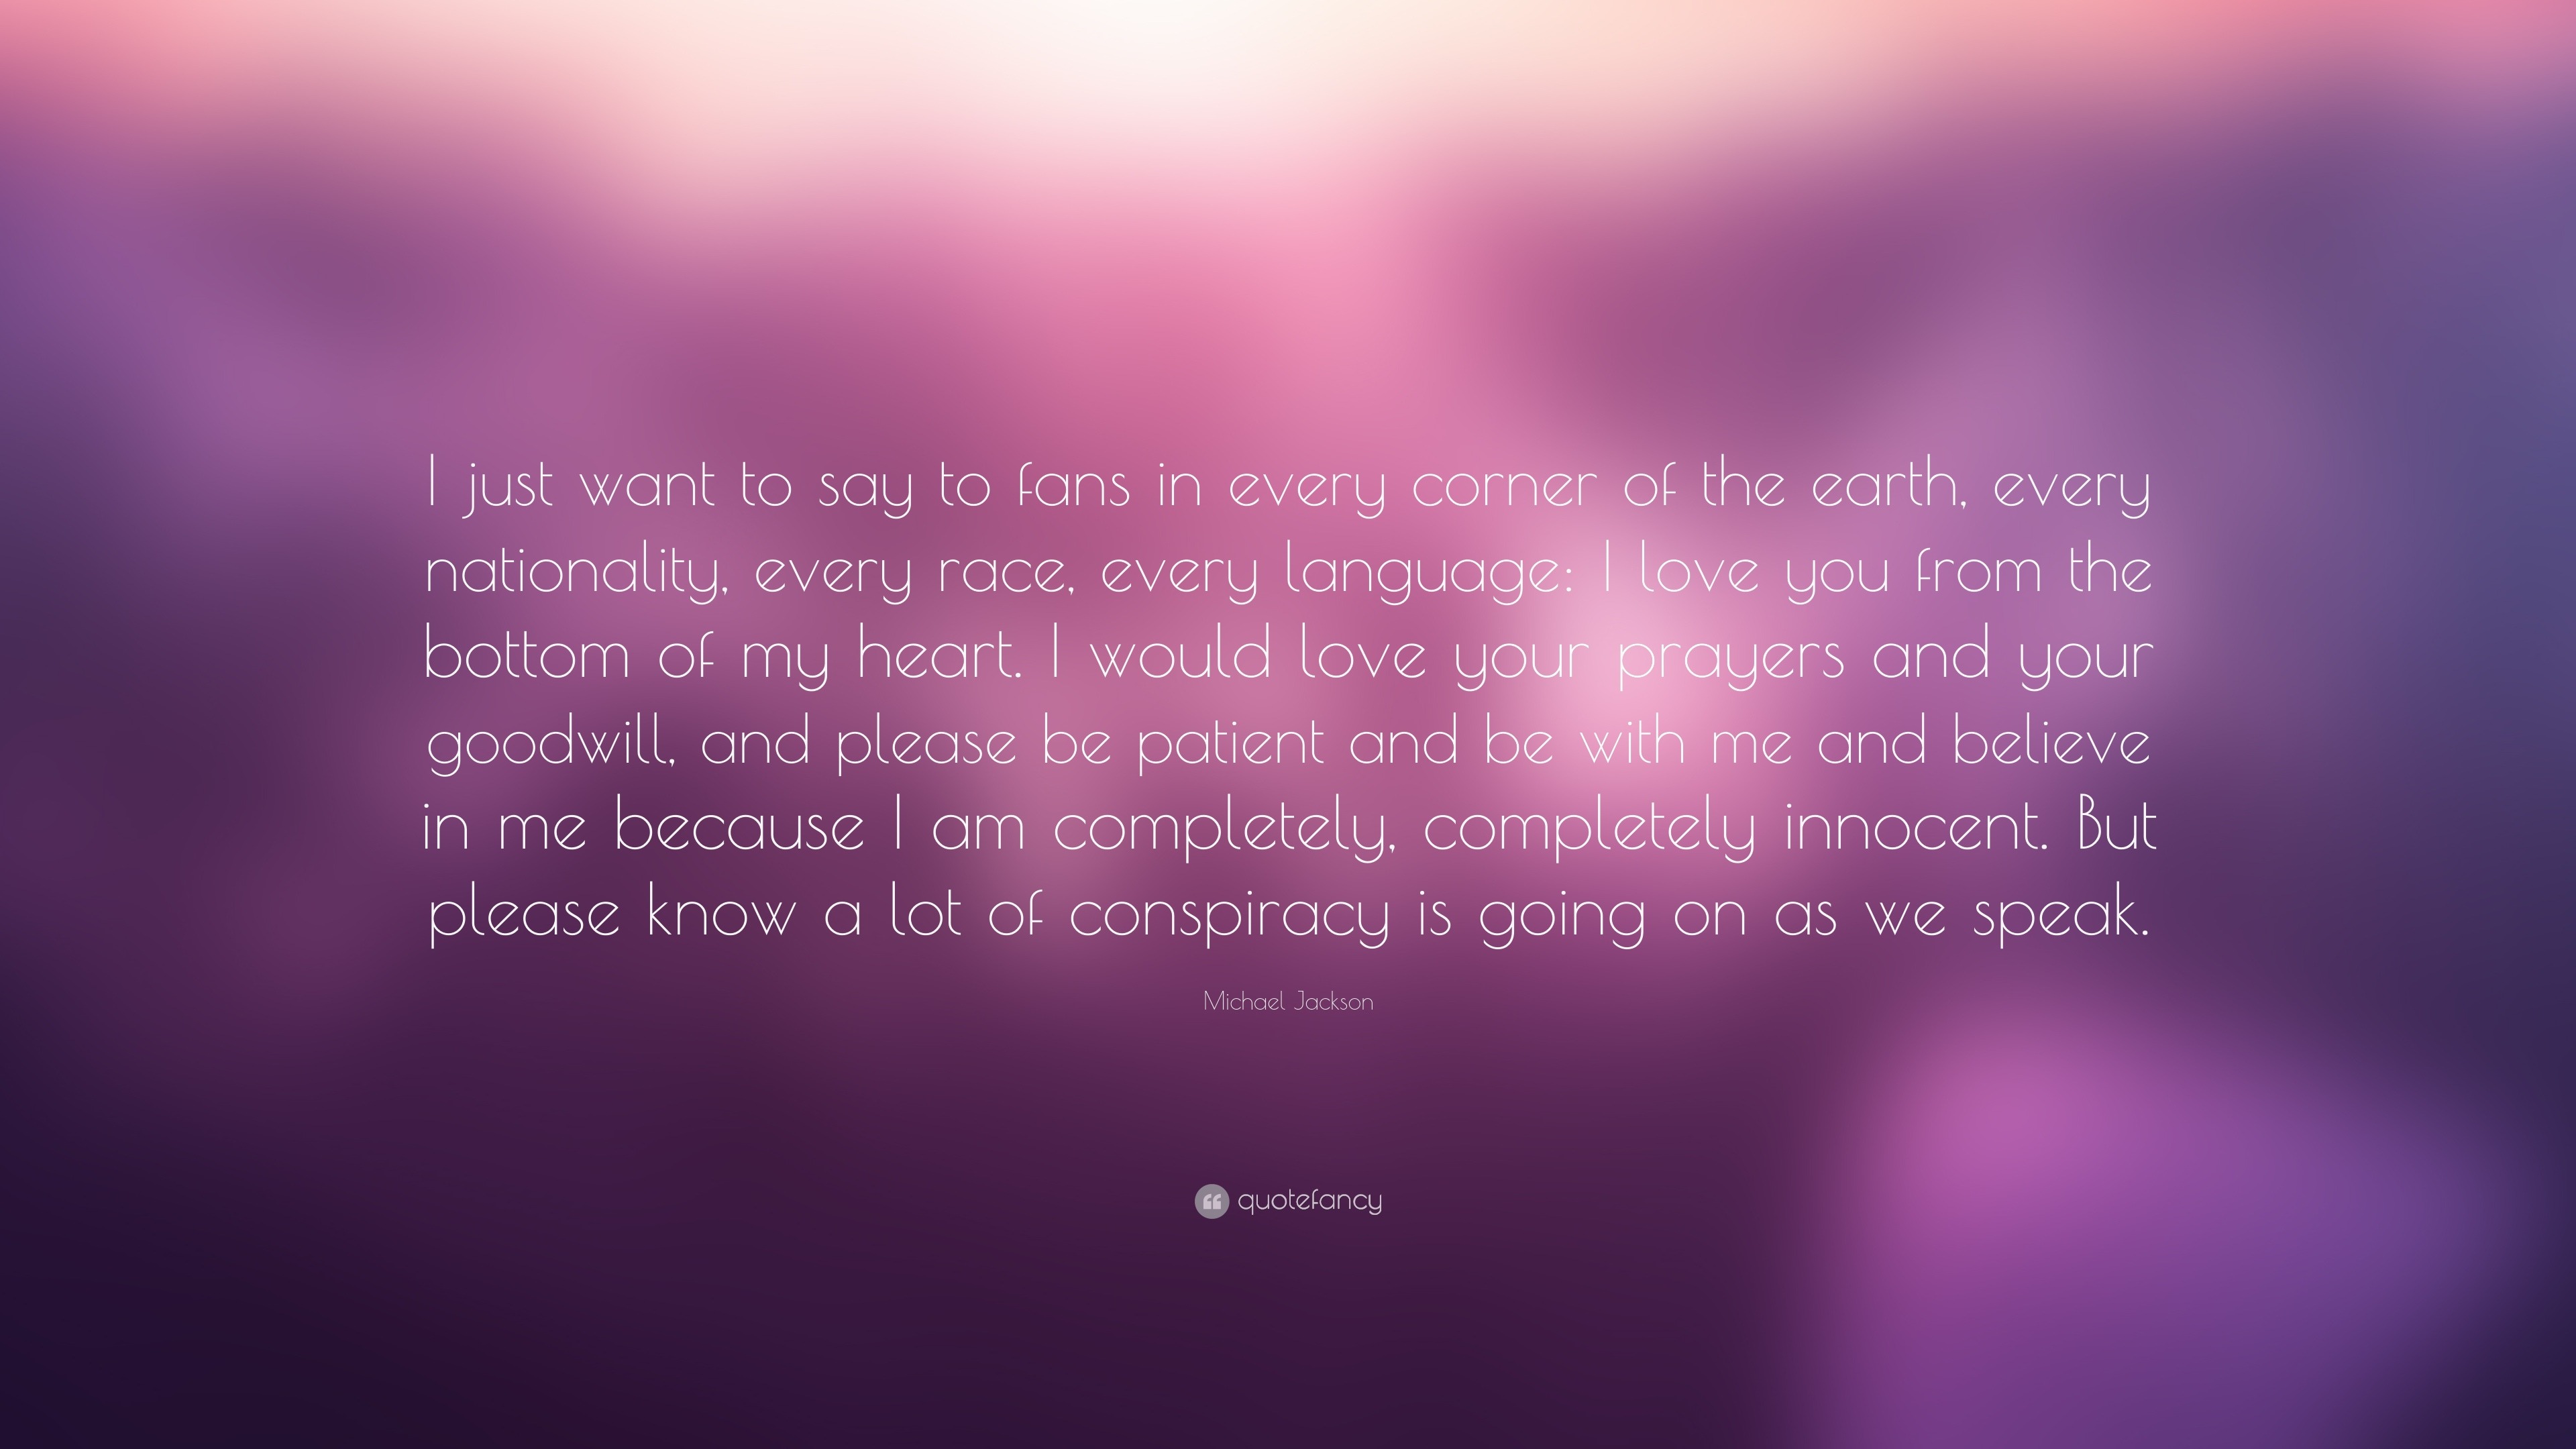 Michael Jackson Quote “I just want to say to fans in every corner of